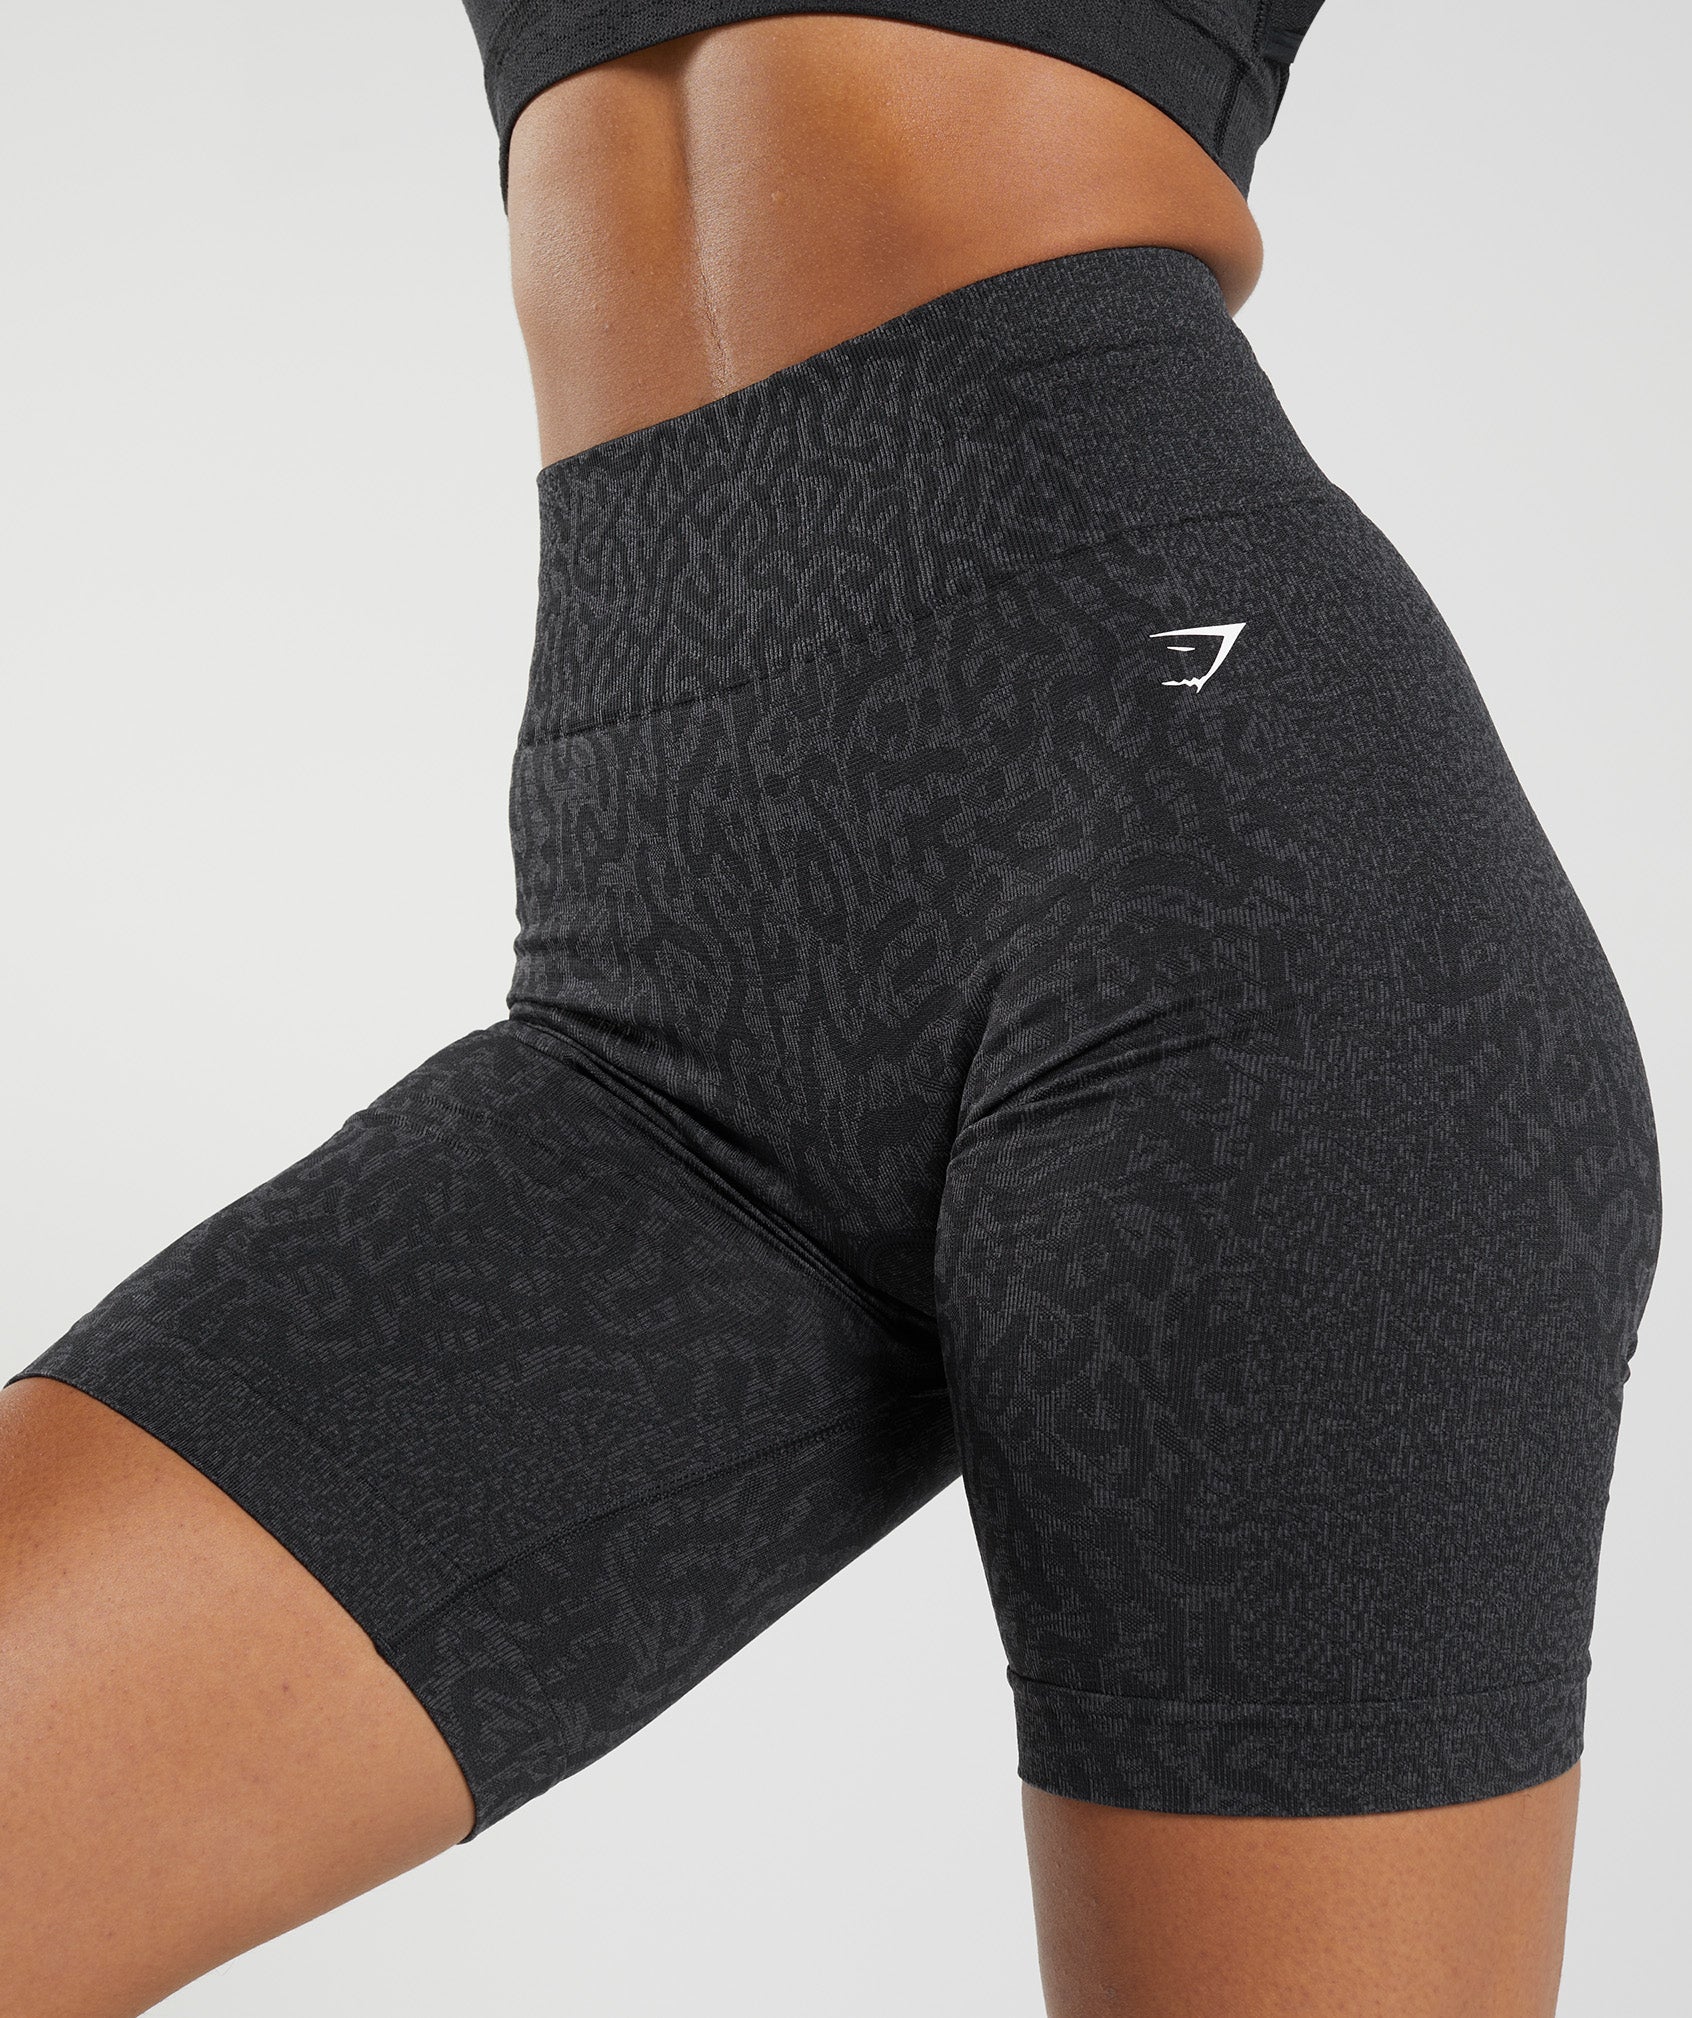 Adapt Animal Seamless Cycling Shorts in Reef |  Black